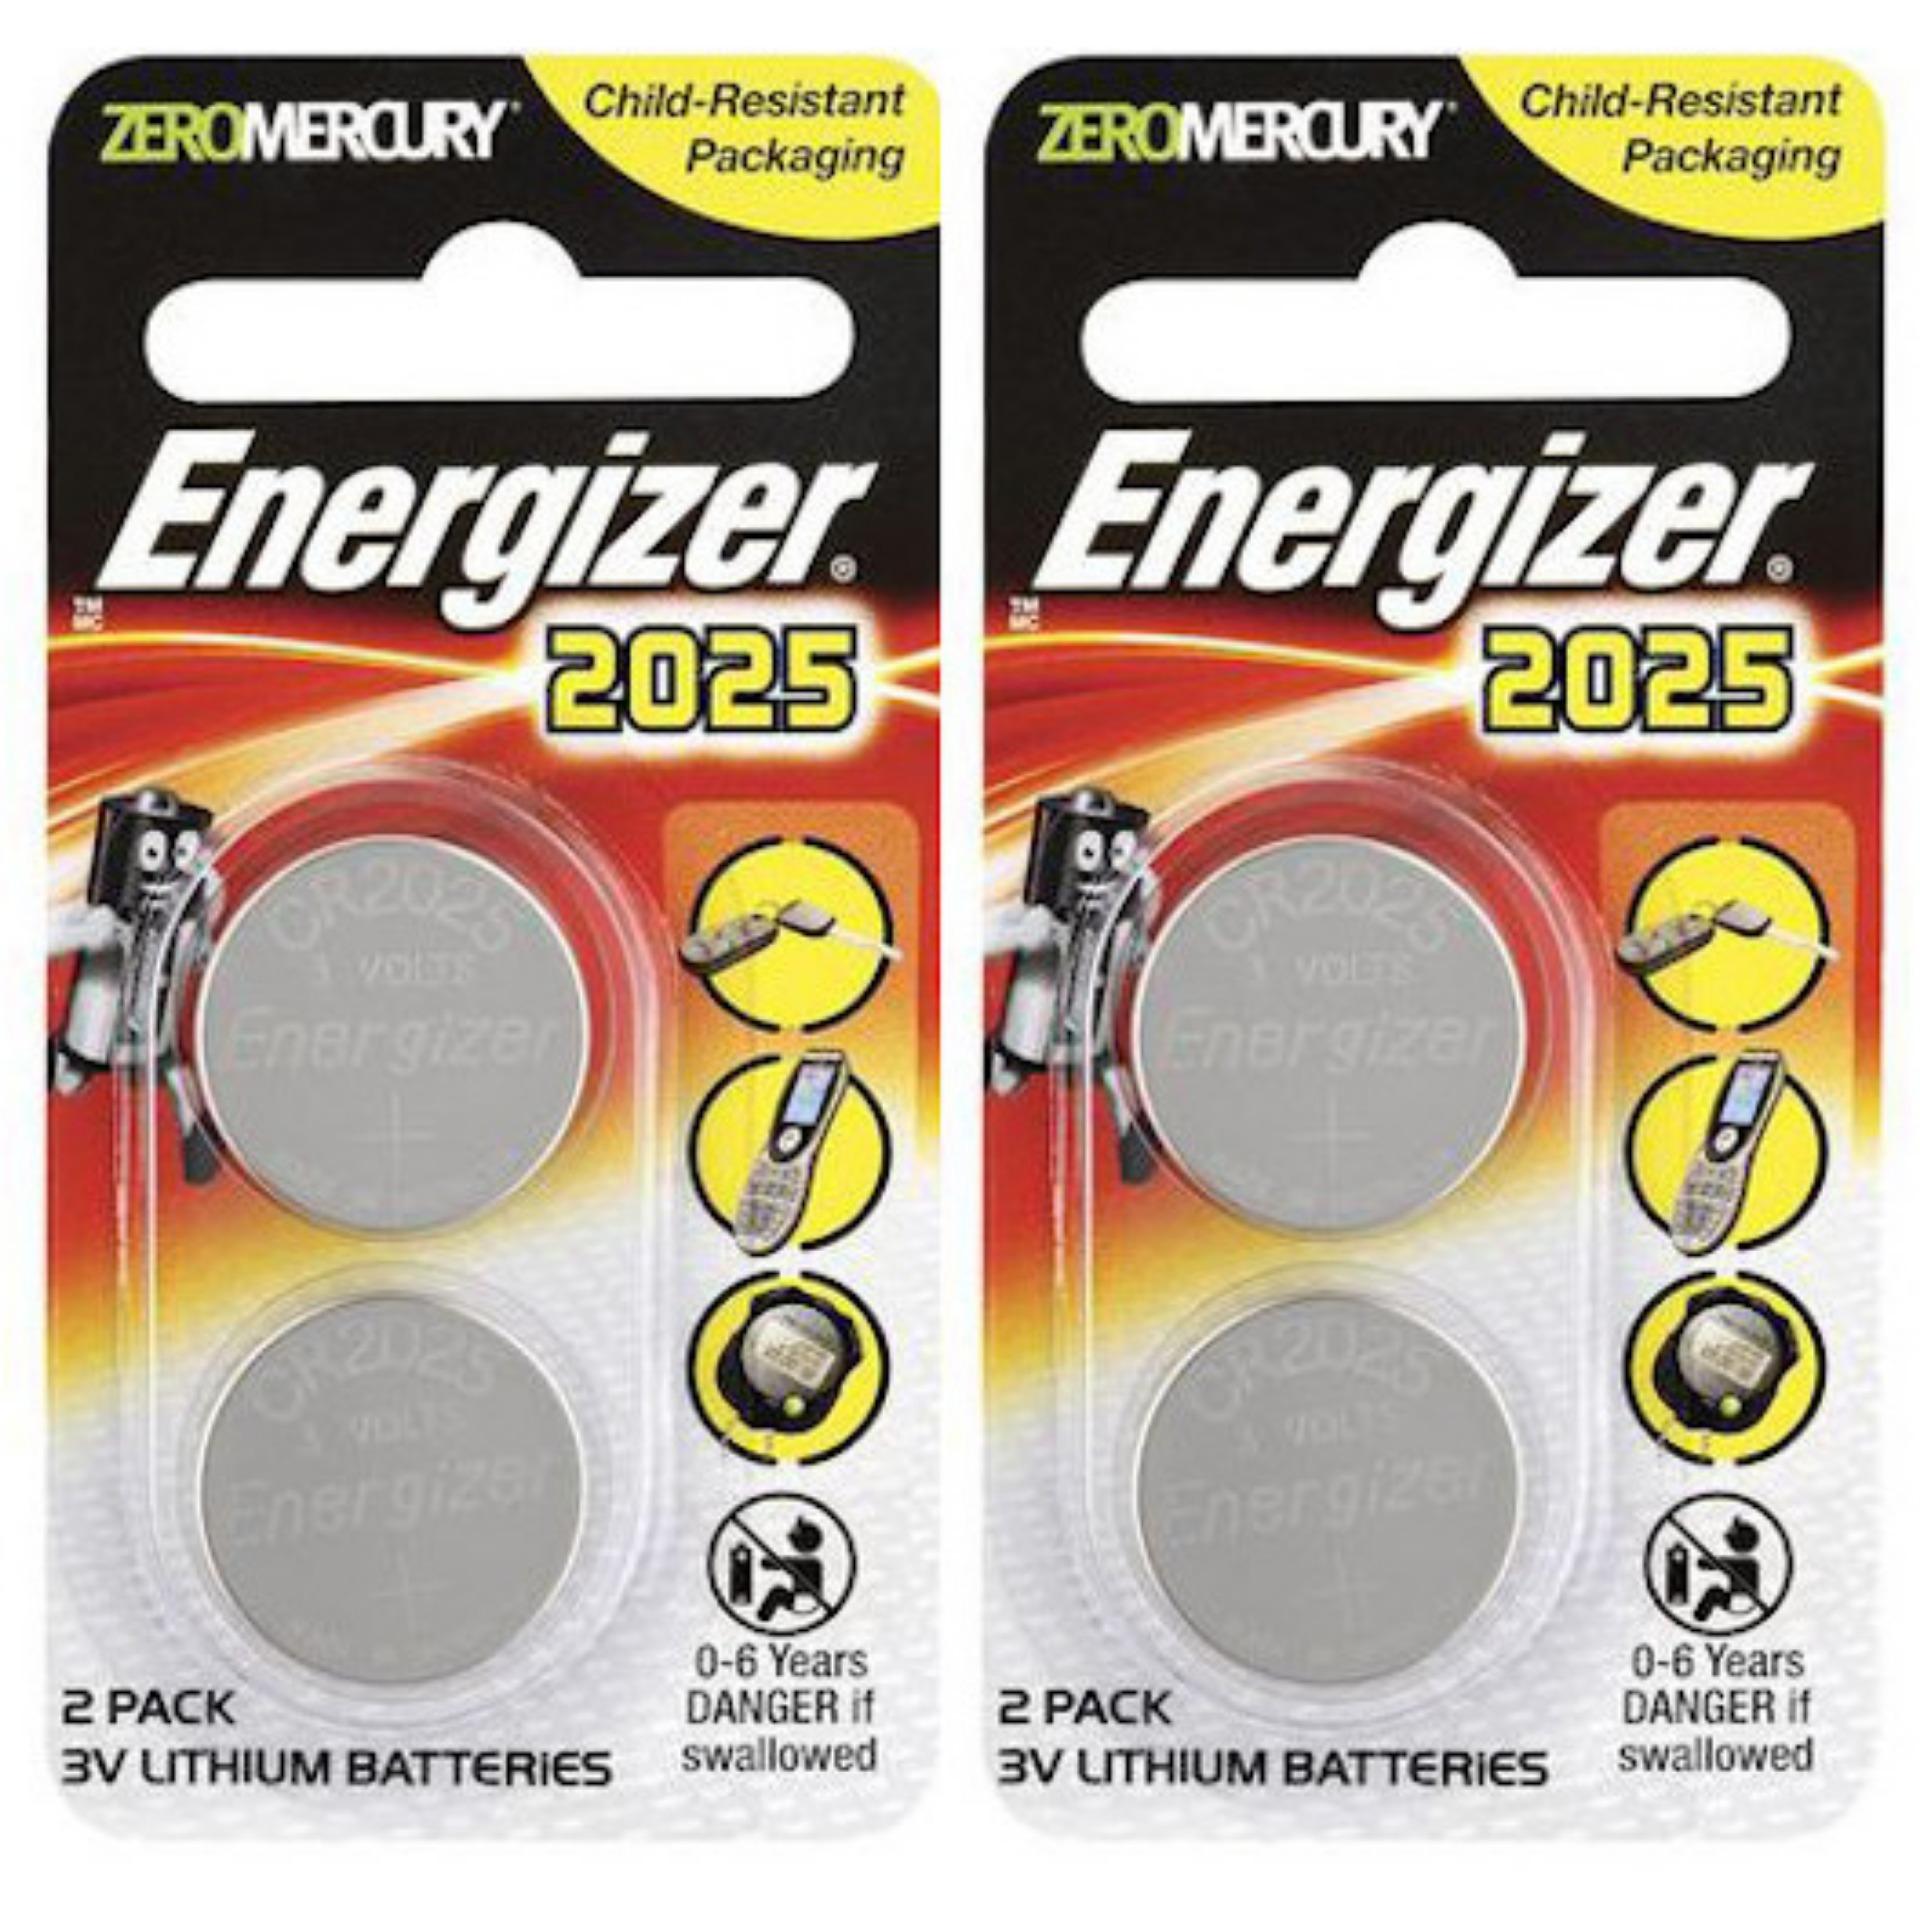 Energizer ECR2025 3V Lithium Coin Cell Battery Compatible with CR2025 